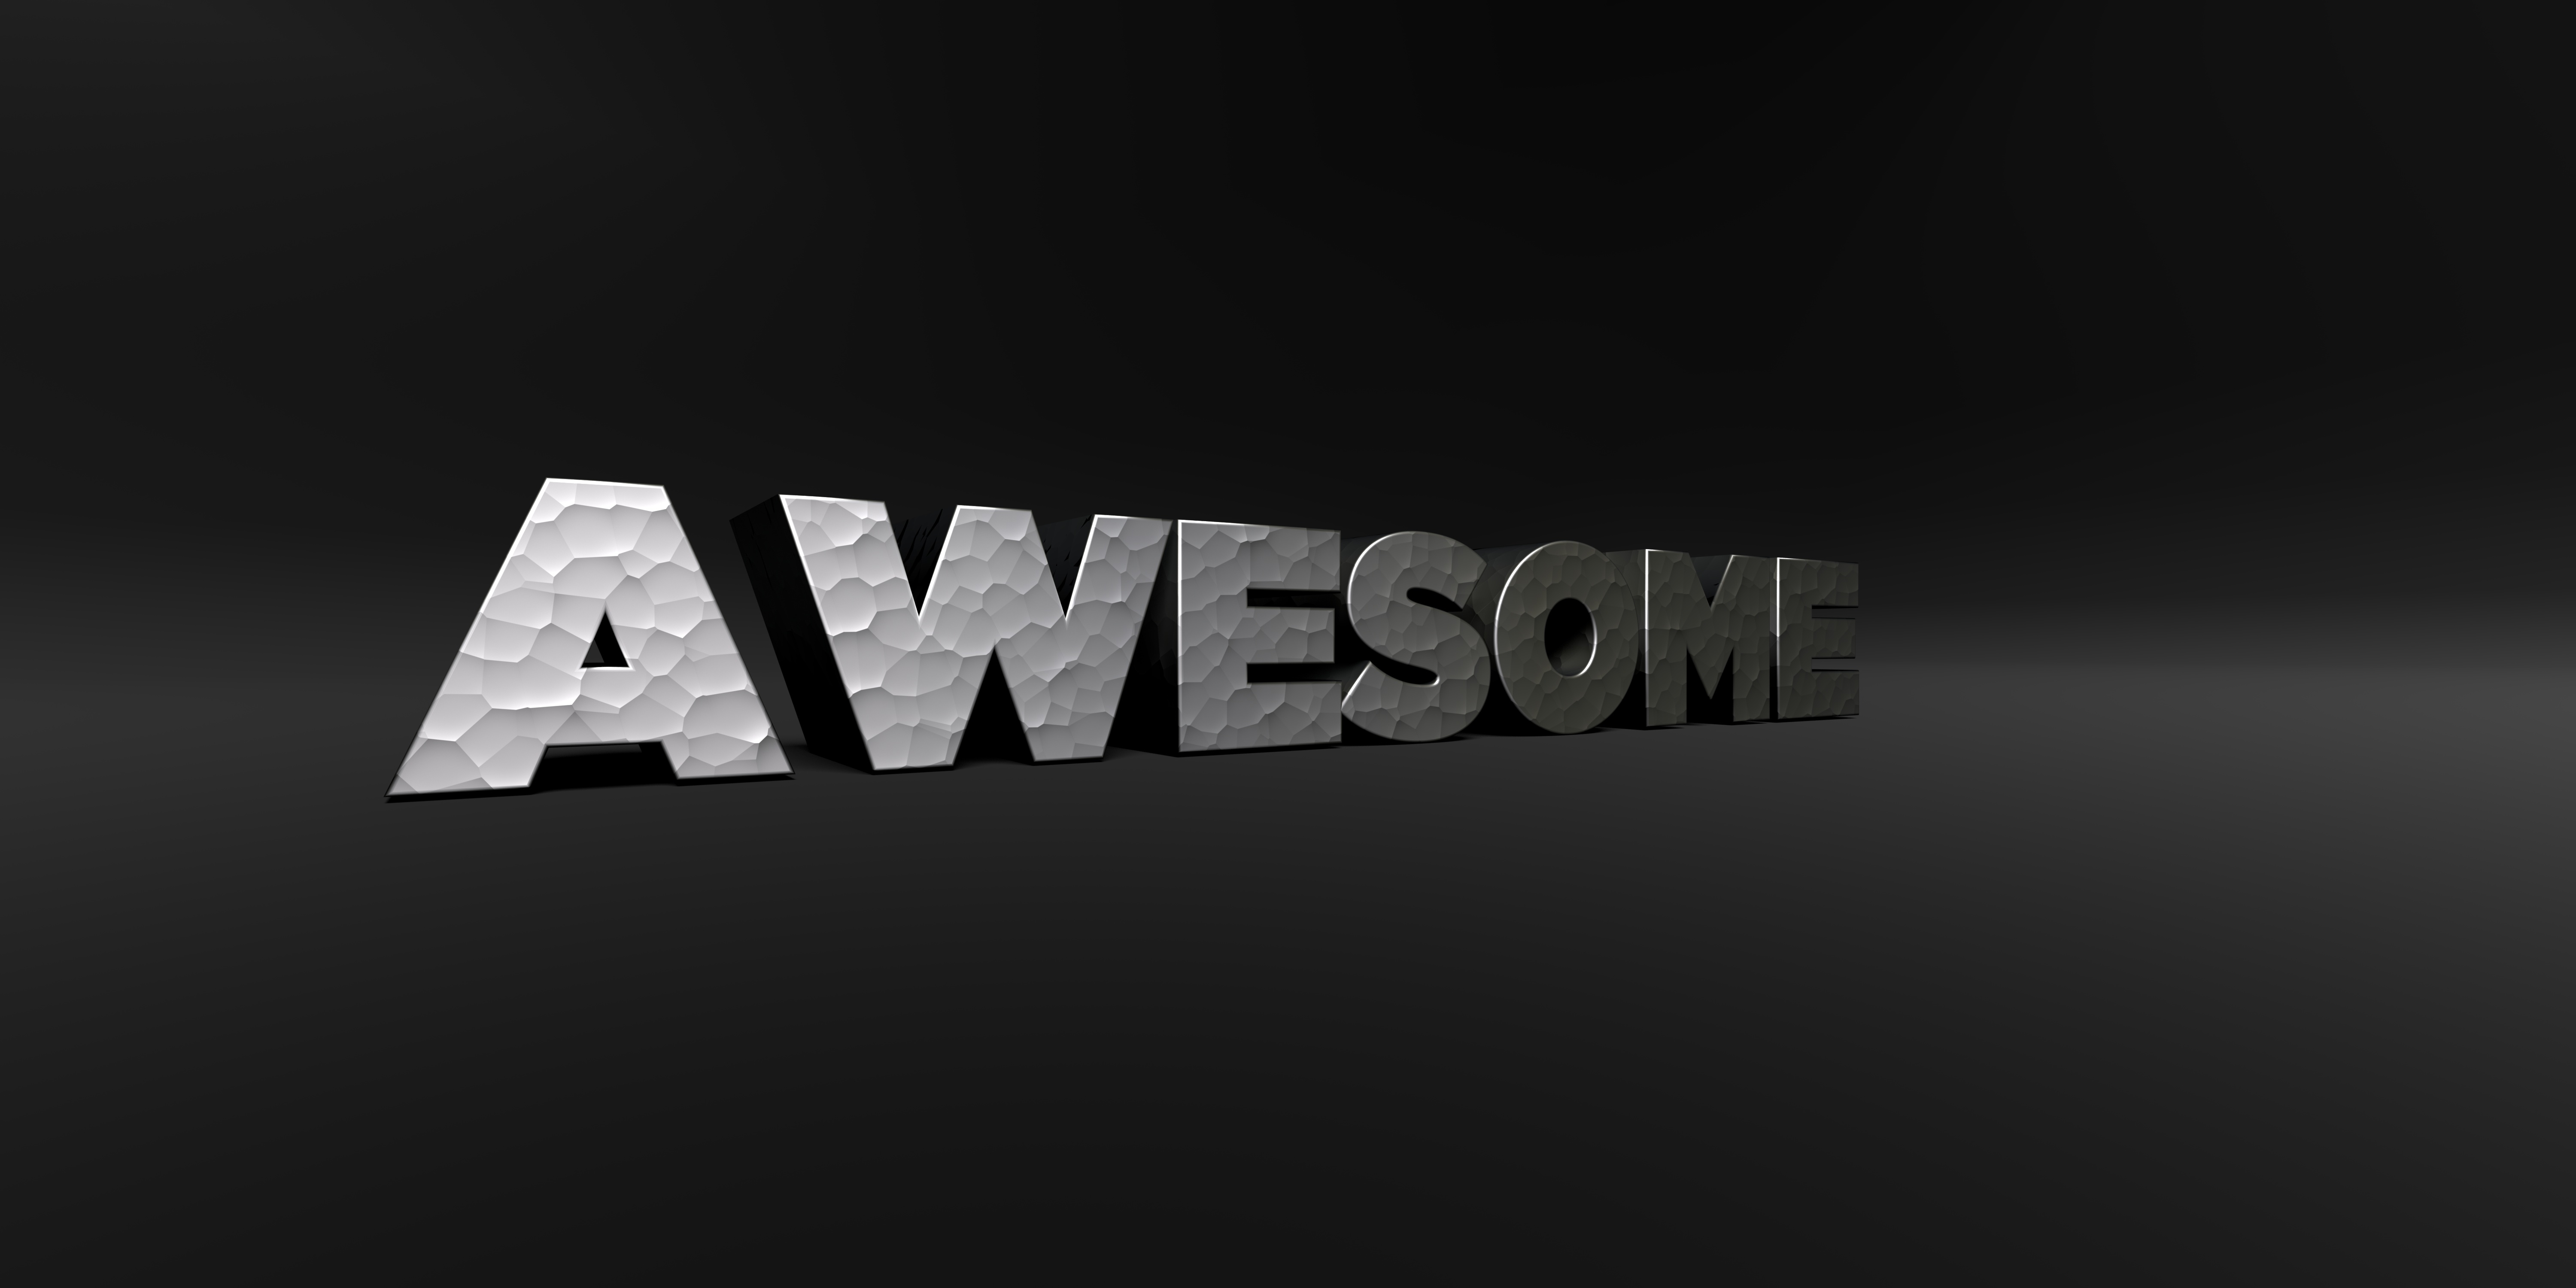 Awesome block letters dark background.jpeg